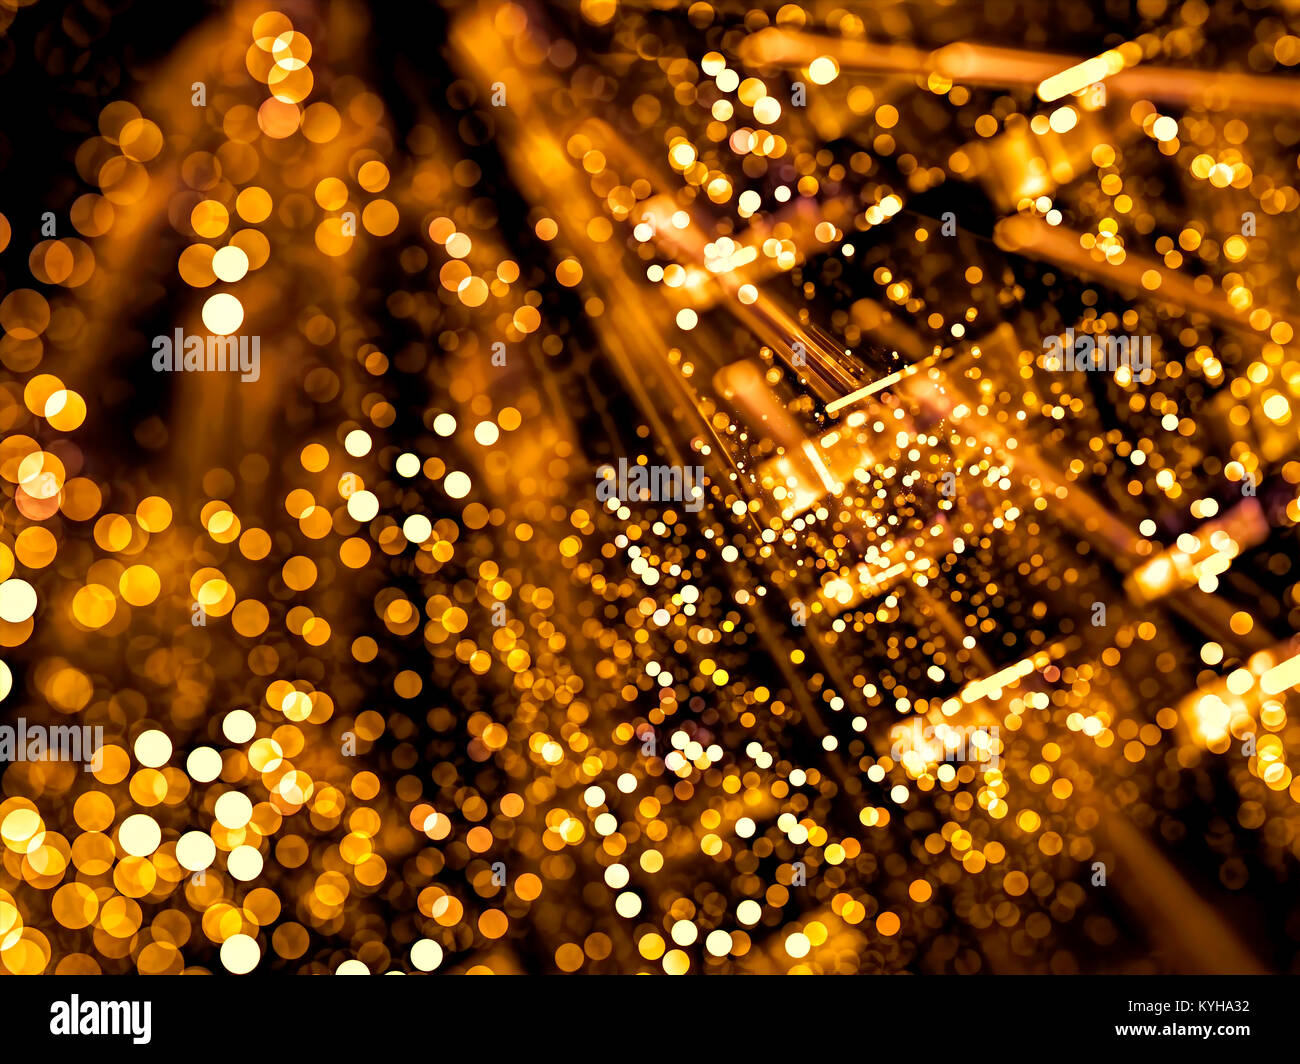 Blurred golden background - abstract computer-generated image. Tech style design with perspective and bubble bokeh. For web design, covers, posters. Stock Photo